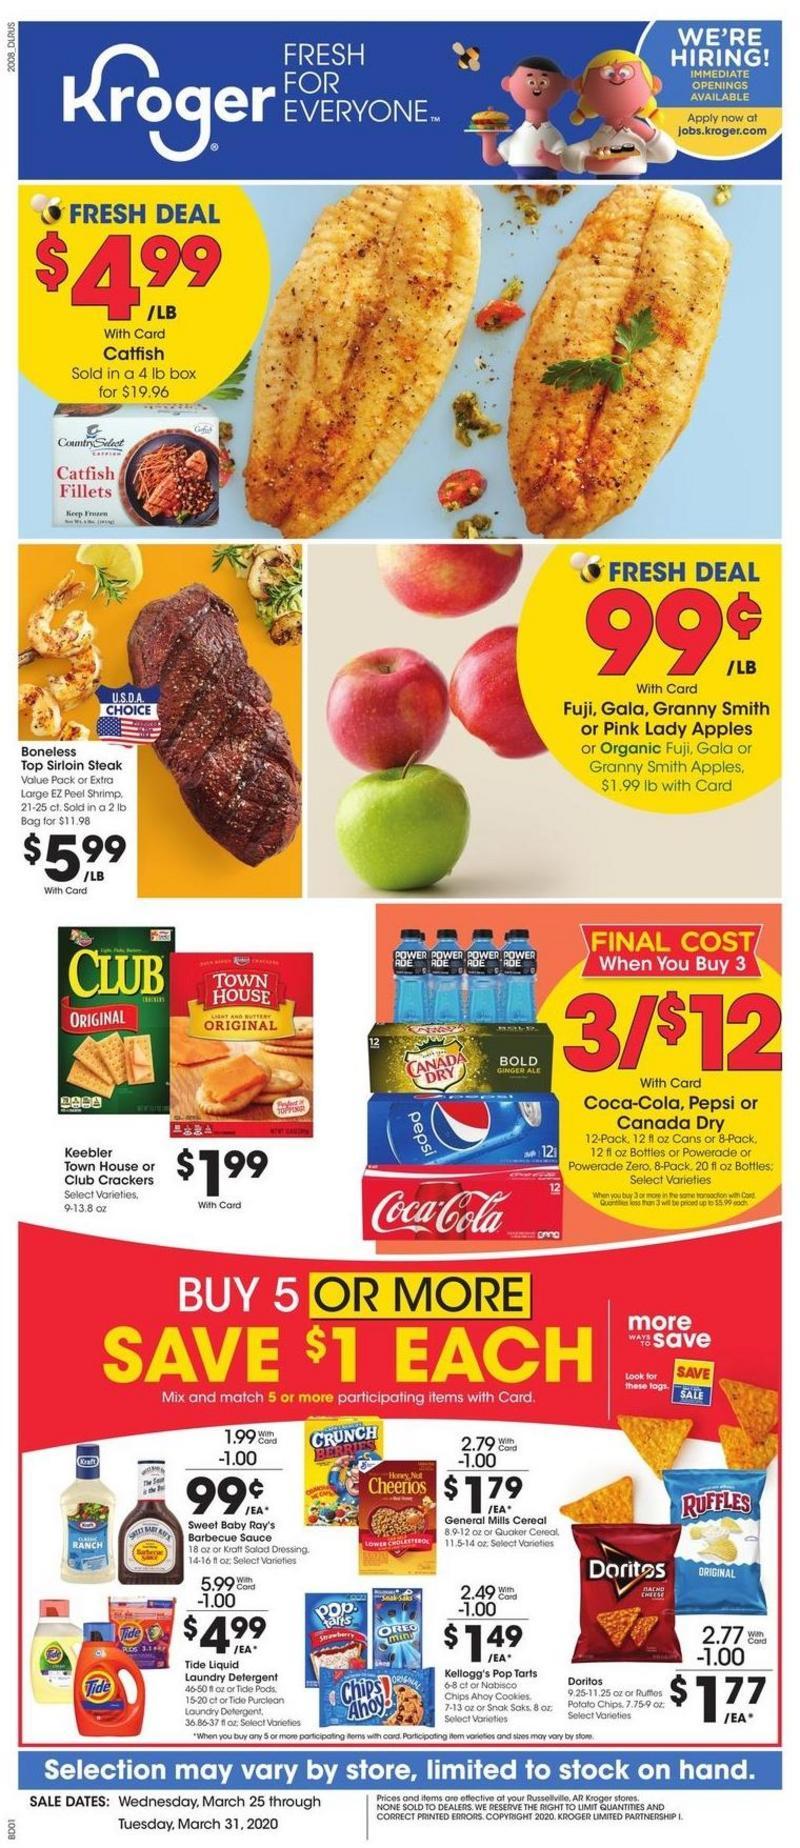 Kroger Weekly Ads & Special Buys from March 25